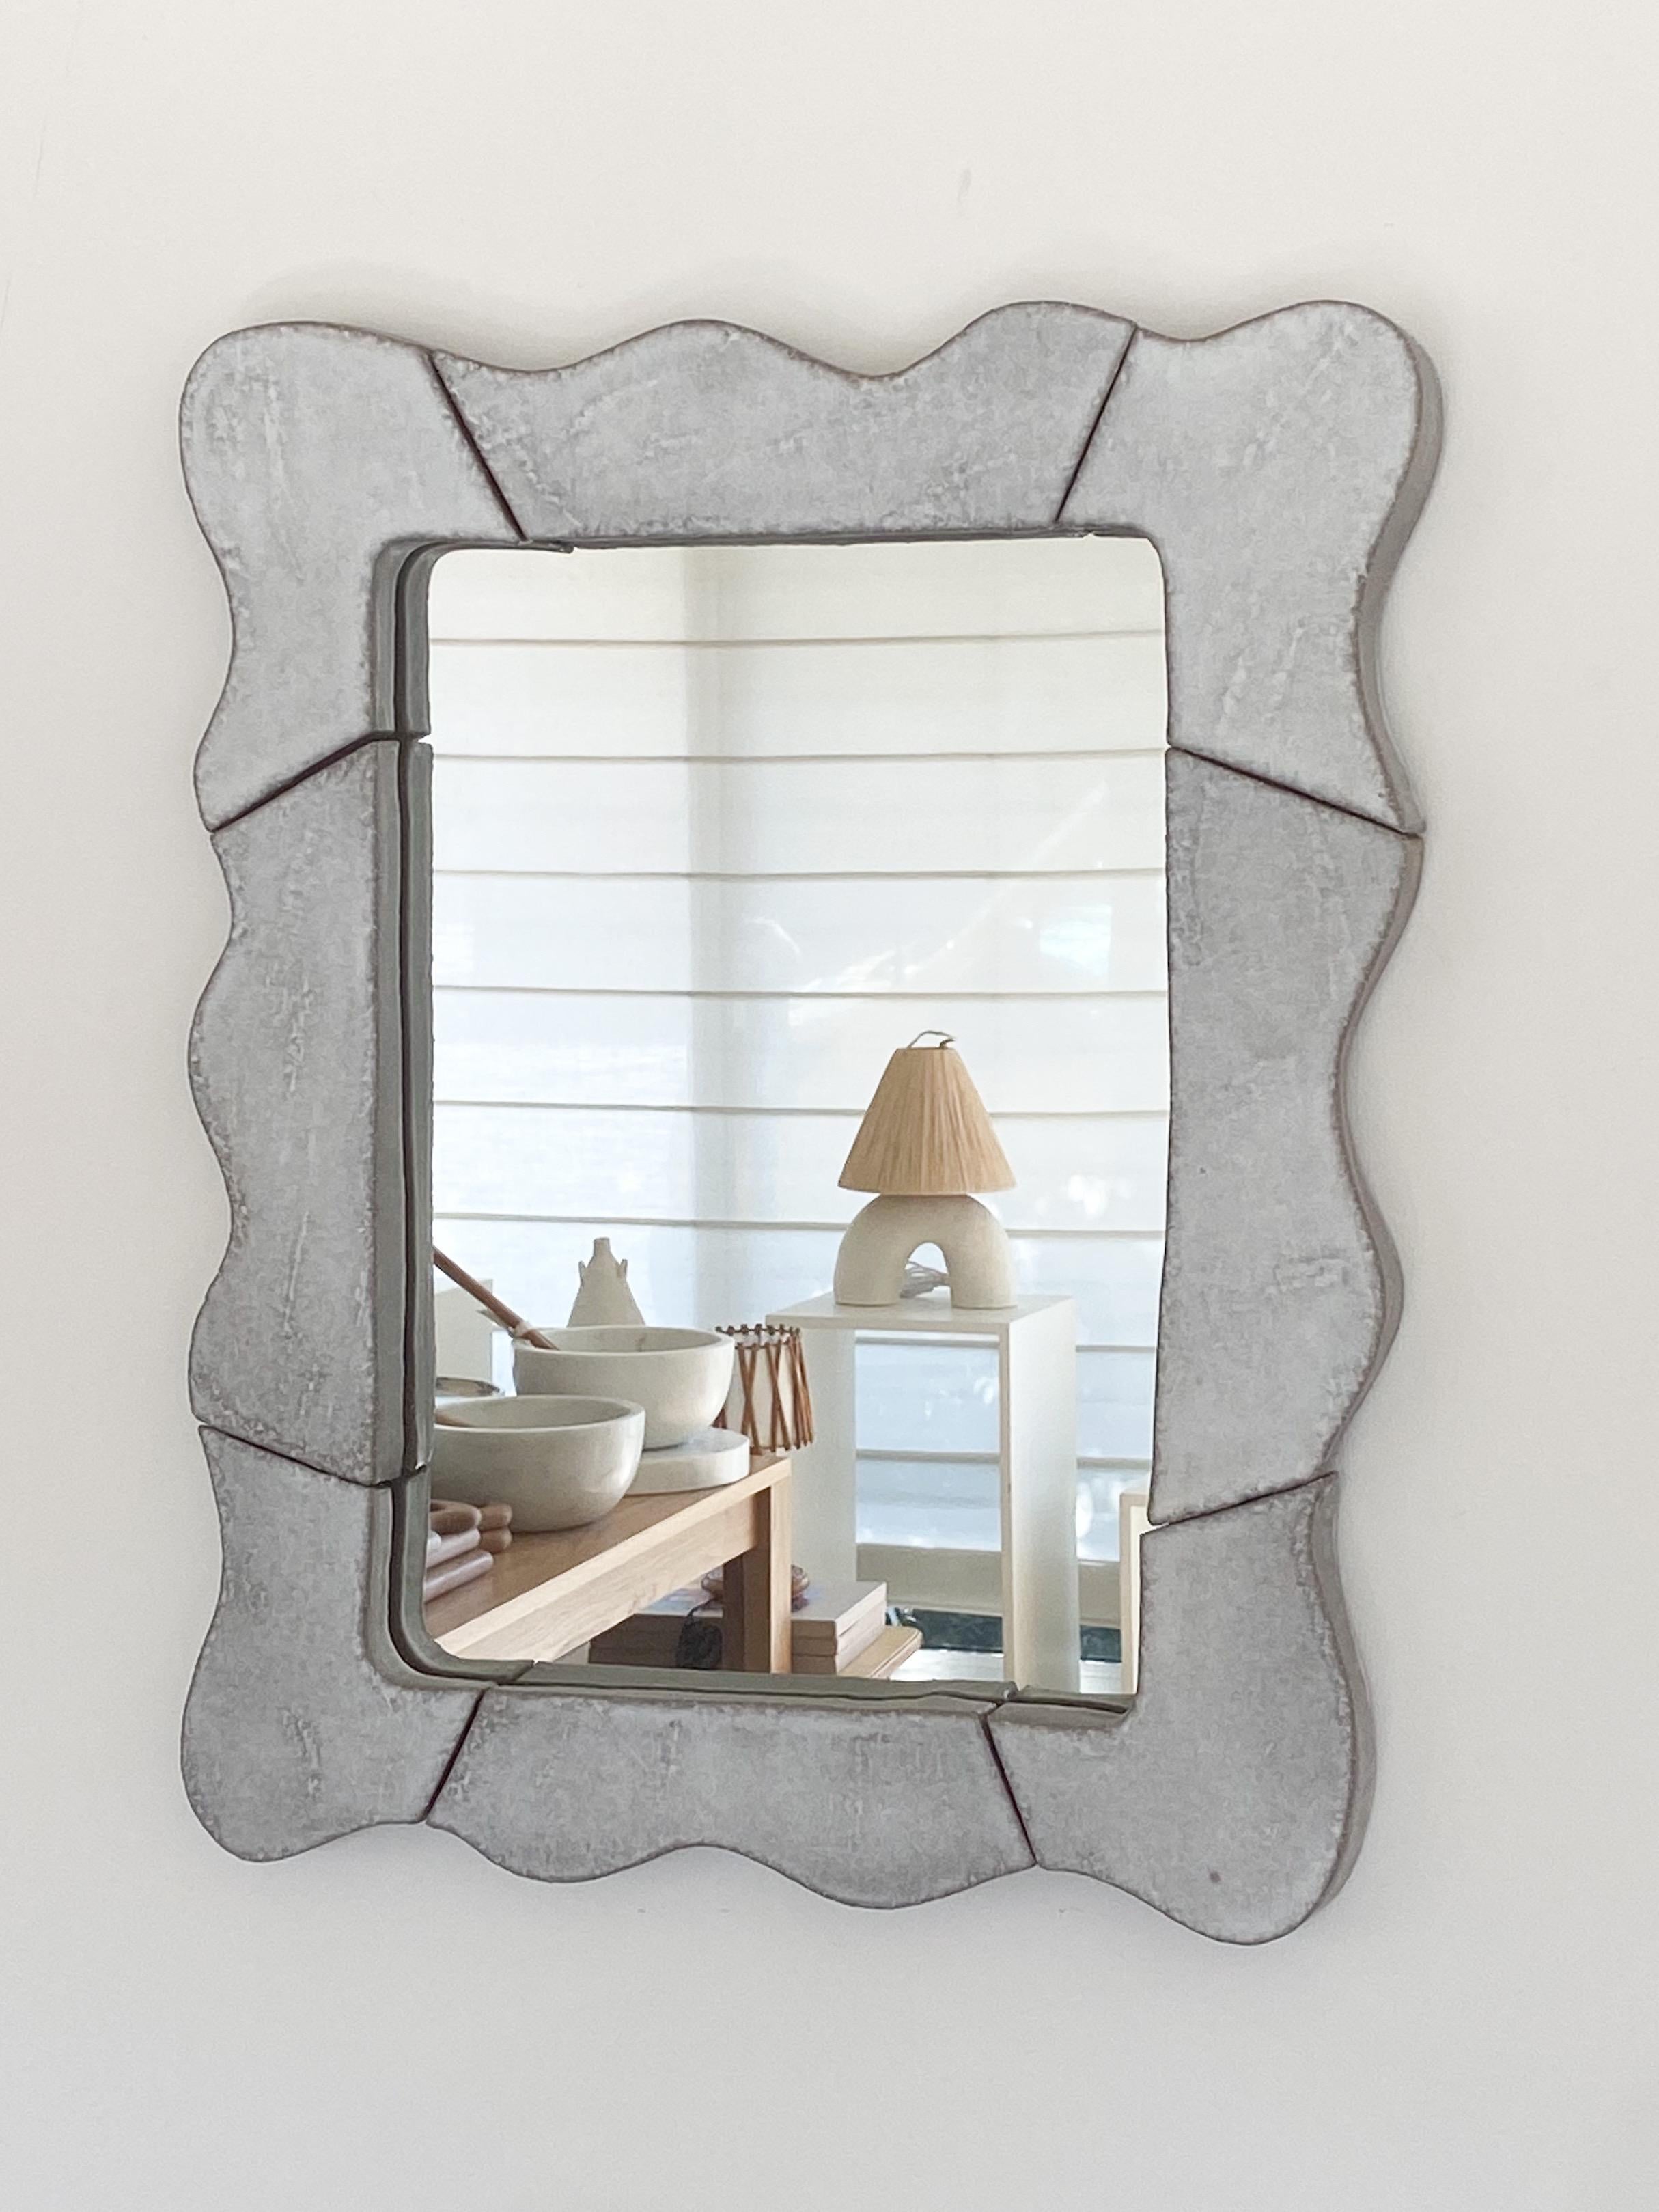 Newly made wavy ceramic mirror. Hand-sculpted sections of ceramic placed together to create a beautiful wavy rectangular frame. White glaze over terracotta creates beautiful white-grey coloring.